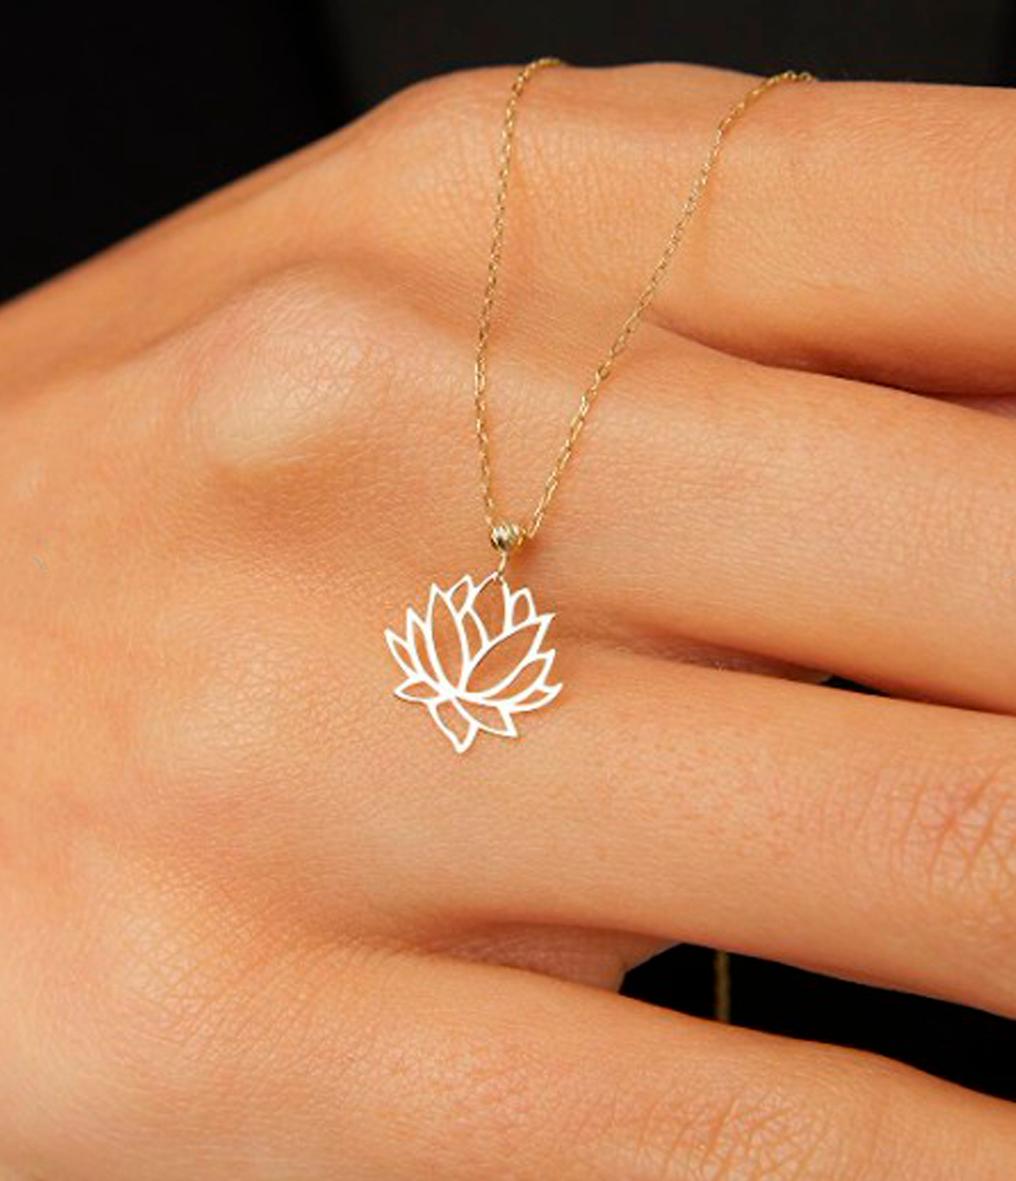 Lotus Necklace in 14 Karat Gold. 
Gold Chain Necklace with Lotus Pendant. Meditation pendant necklace. Flower pendant necklace.

Total weight: 0.9 g.
Length: 44 sm.
Style: Minimalist
Necklace Width: 0.66 mm
Lotus pendant size 11x11 mm.
The must-have